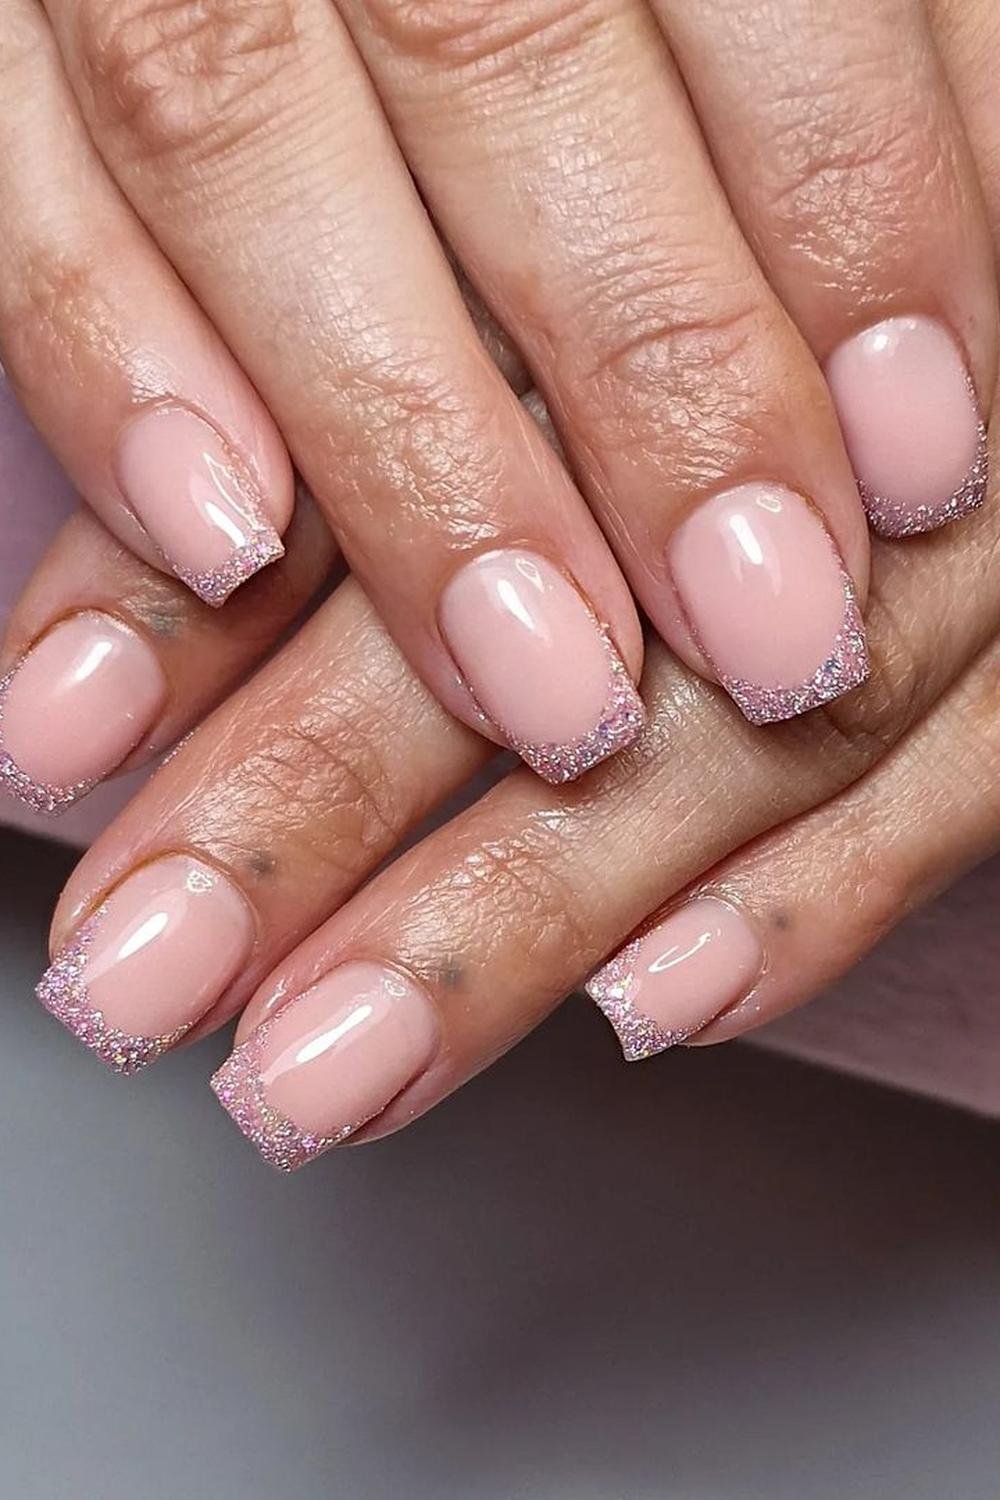 21 - Picture of Glitter French Tip Nails